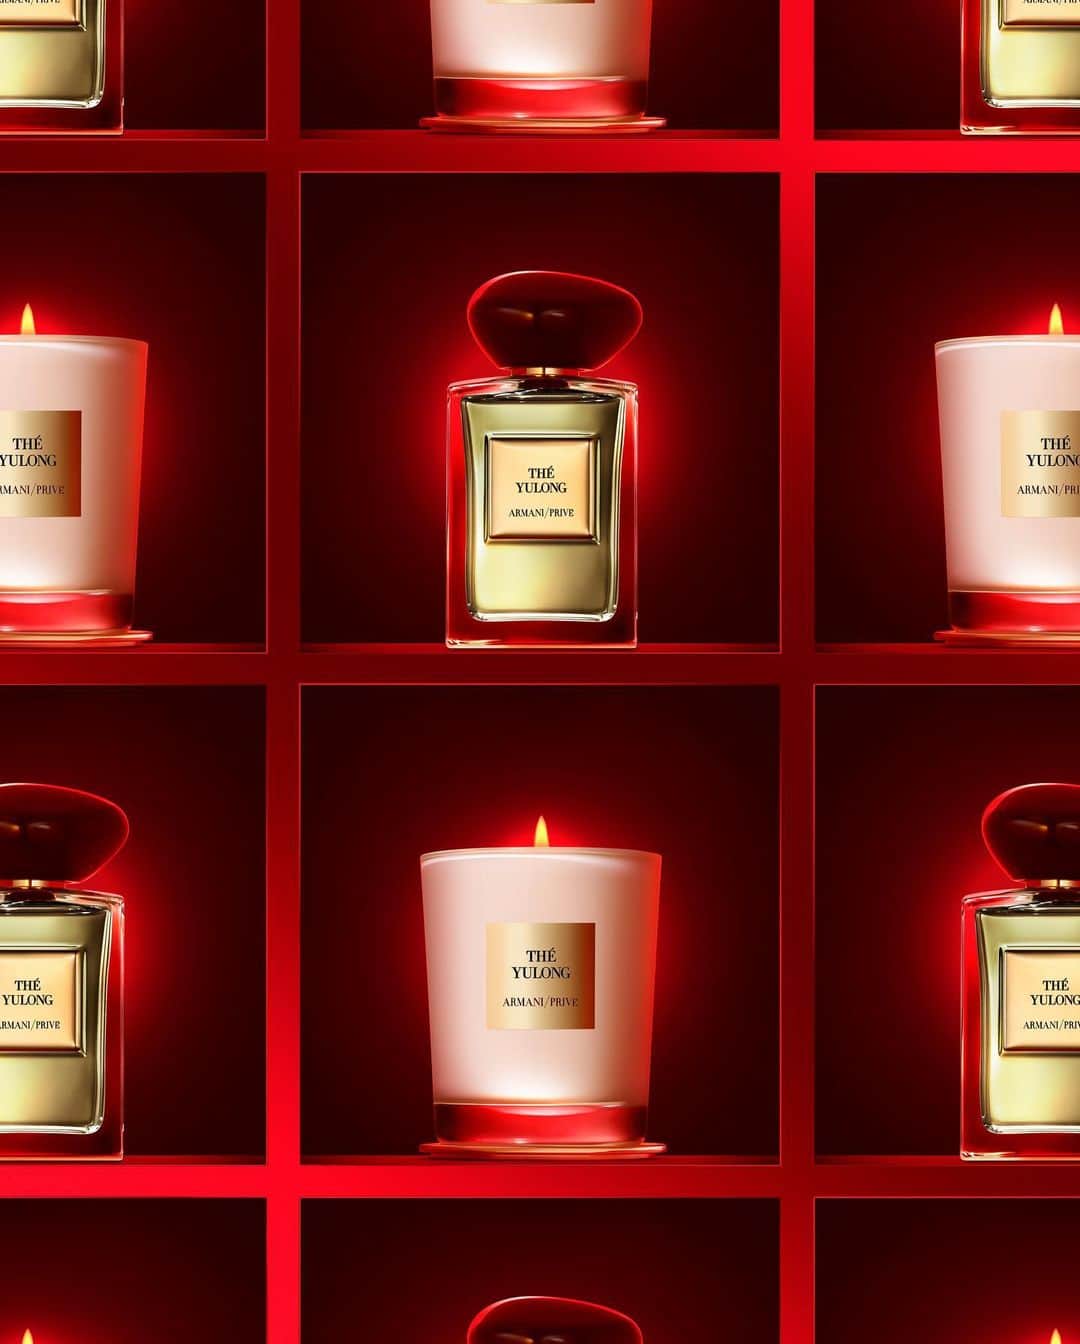 Armani Beautyのインスタグラム：「The gift of luxurious scents. Featuring the fresh and smoky aromas of Armani/Privé THÉ YULONG and the creamy sandalwood scent of Armani/Privé SANTAL DĀN SHĀ, find the perfect festive fragrance for the Holiday Season this year, also available as candles for a complementary olfactory experience.   #Armanibeauty #ArmaniGift #ArmaniPrive #HolidayFragrance #HolidayCandle」